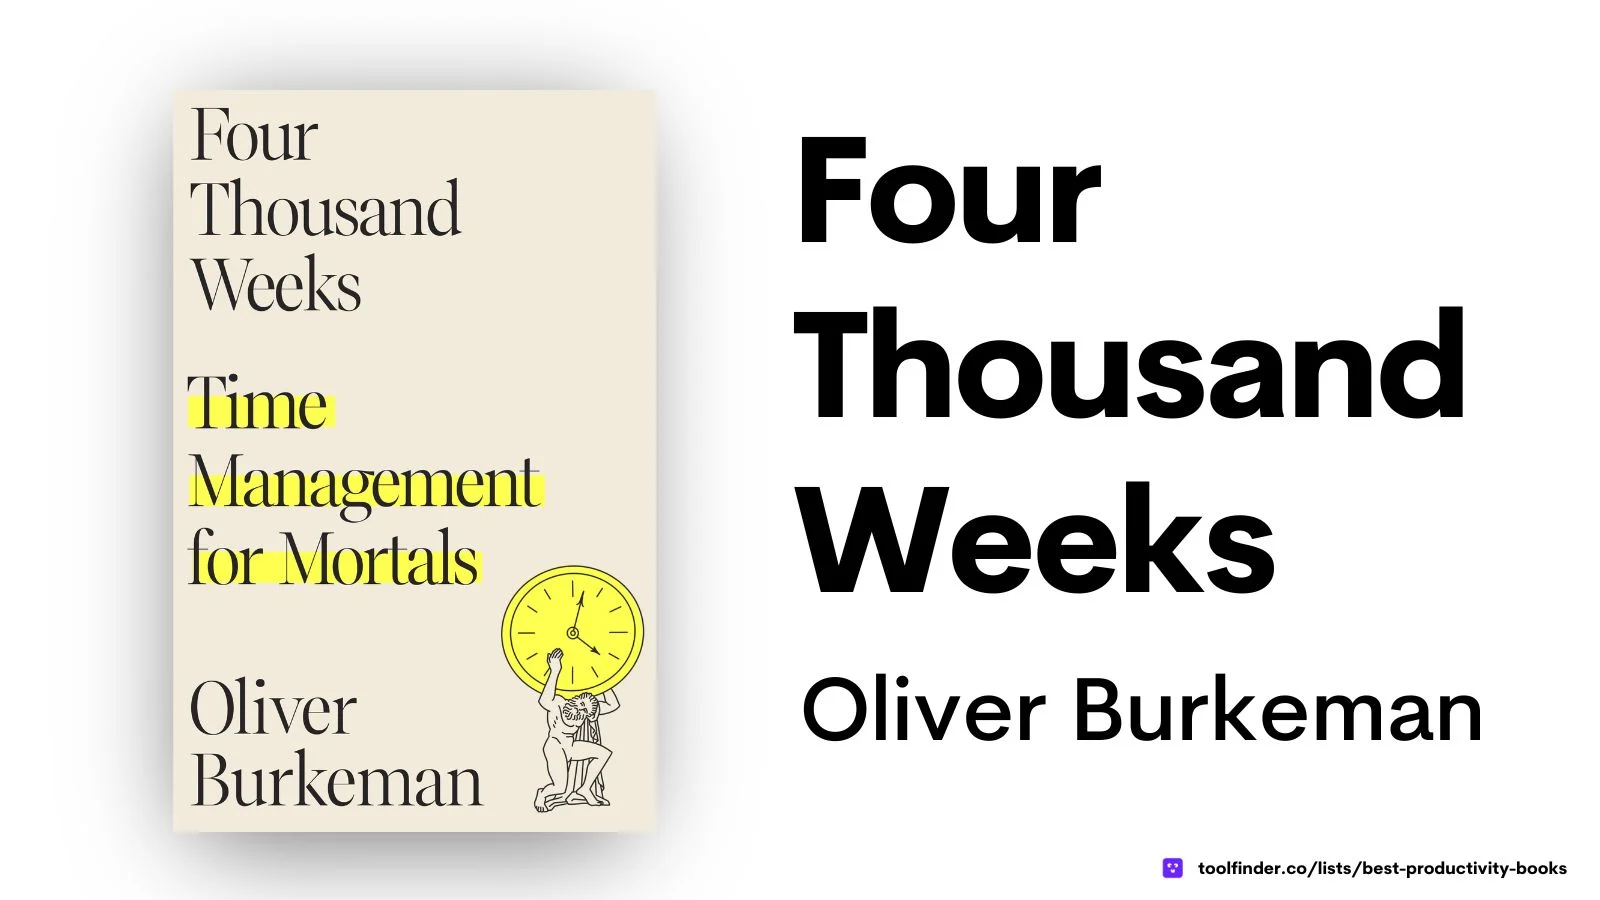 Four Thousand Weeks by Oliver Burkeman is about making the most of the time you have to create a more fulfilling life.